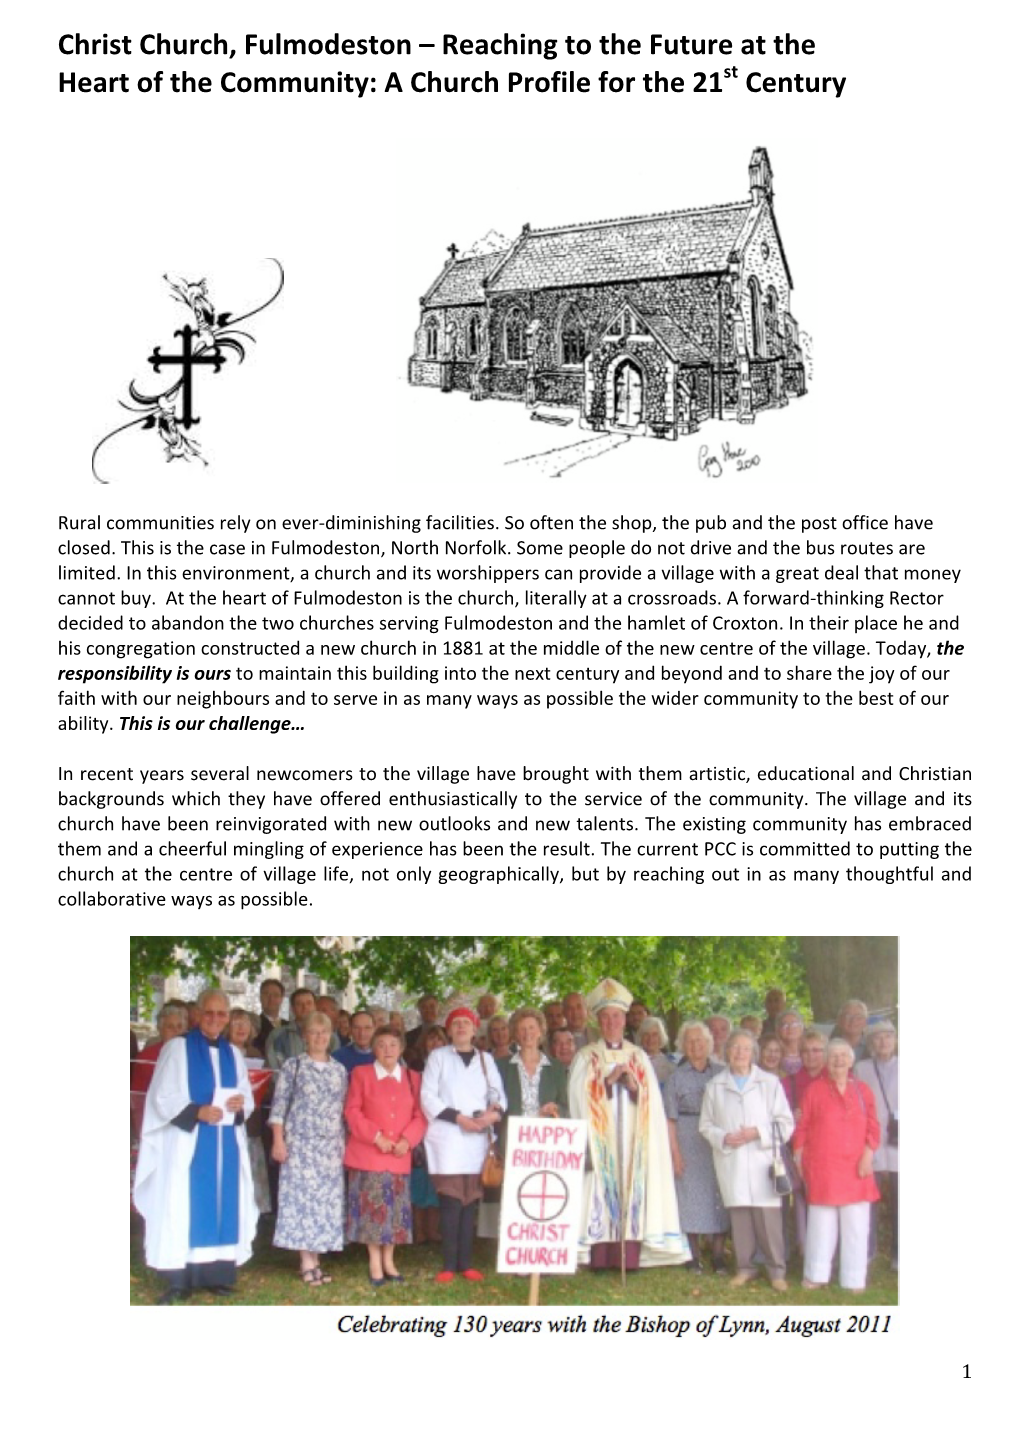 Christ Church, Fulmodeston – Reaching to the Future at the Heart of the Community: a Church Profile for the 21St Century